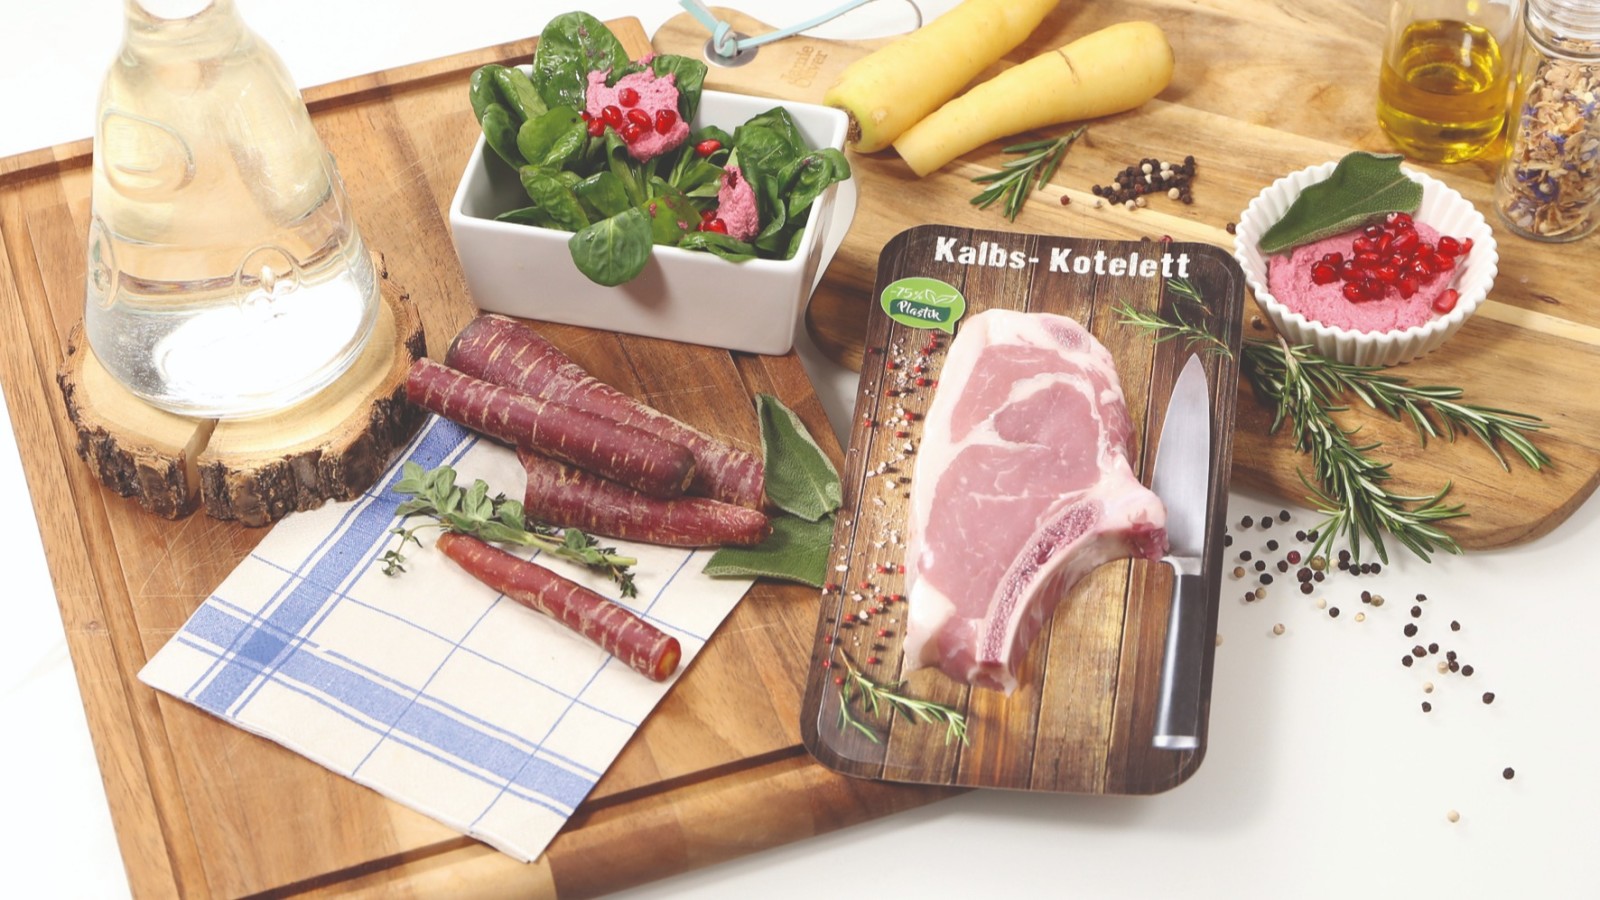 Skinpack/Flatskin from Nemco is the perfect solution for highlighting the product in the refrigerated display. We have a wide range of meat packaging for products such as meat, fish, chicken, vegetables, and ready meals, several of which are reusable or plastic-reduced.